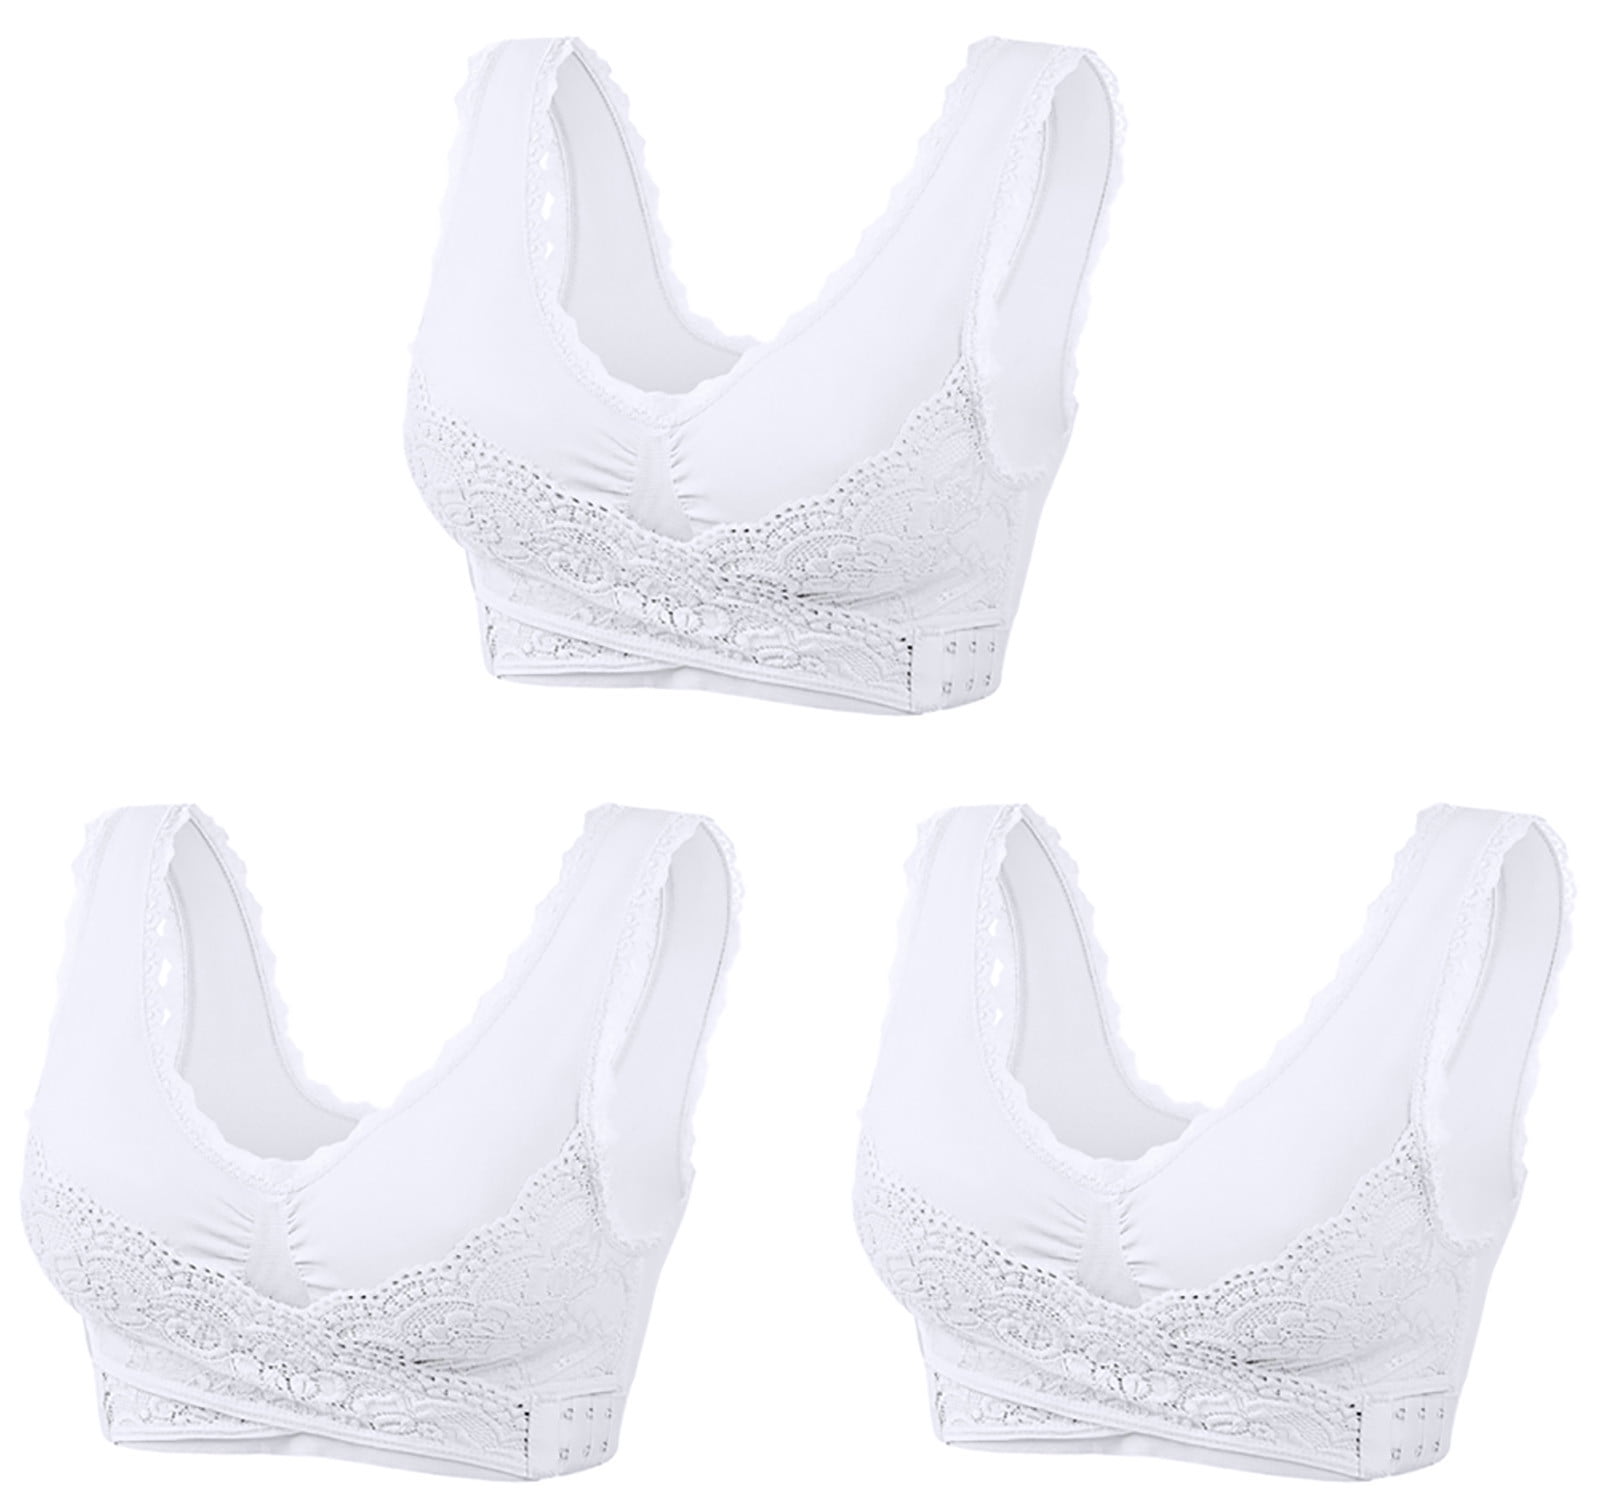 Kendally Bras for Older Women Kendally Lace Seamless Bras Comfy